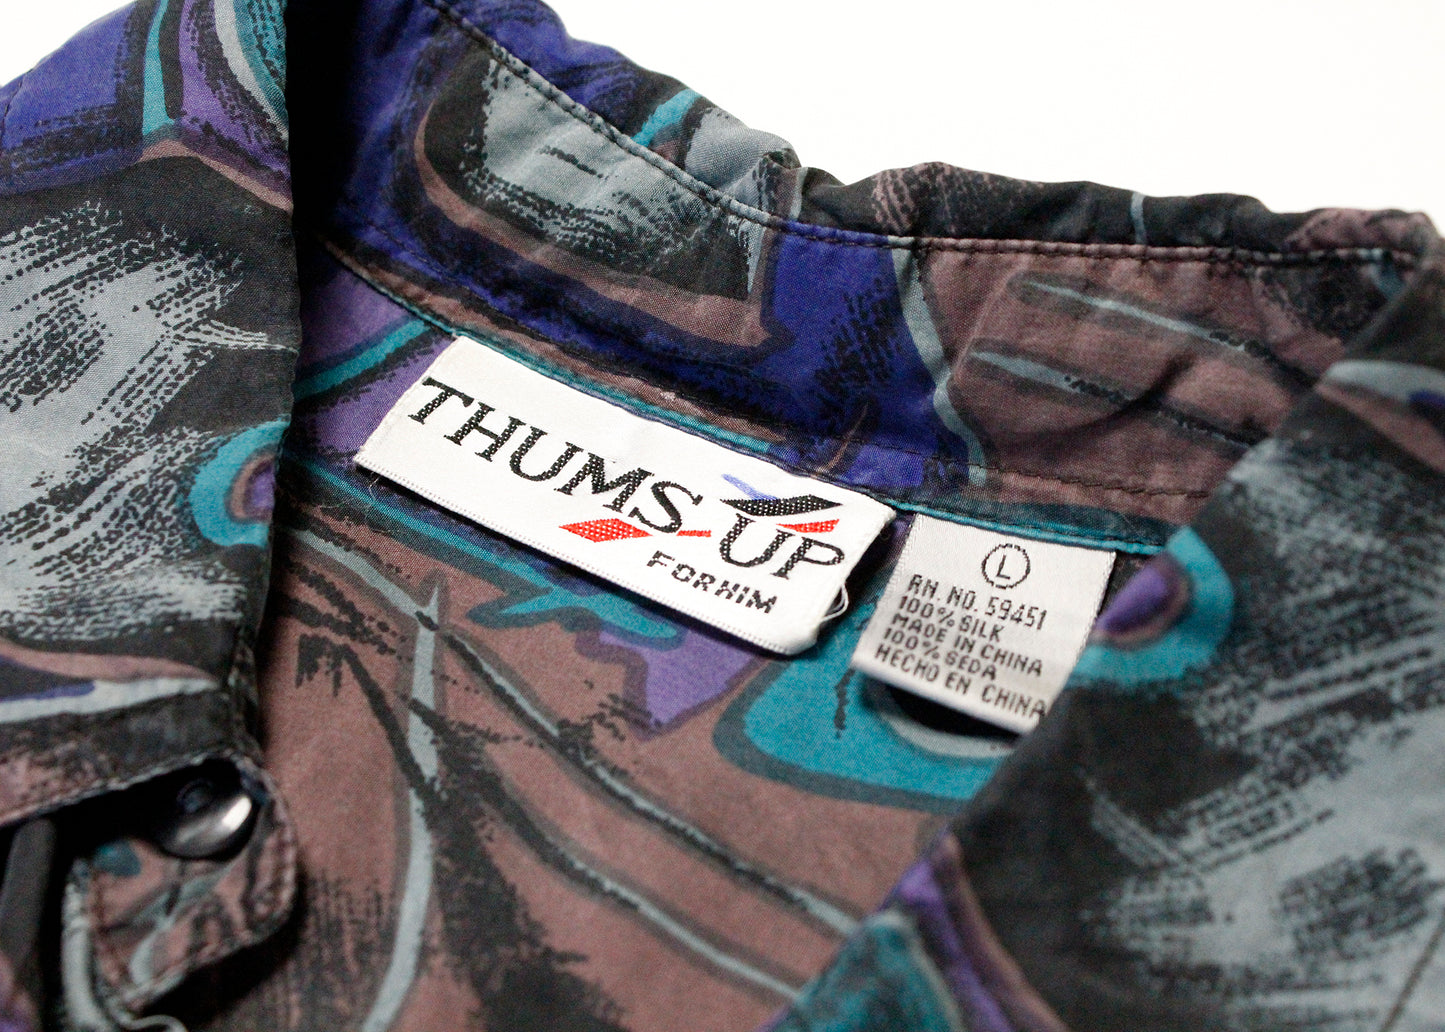 Thums Up For Him 90s Geometric Printed Silk Shirt